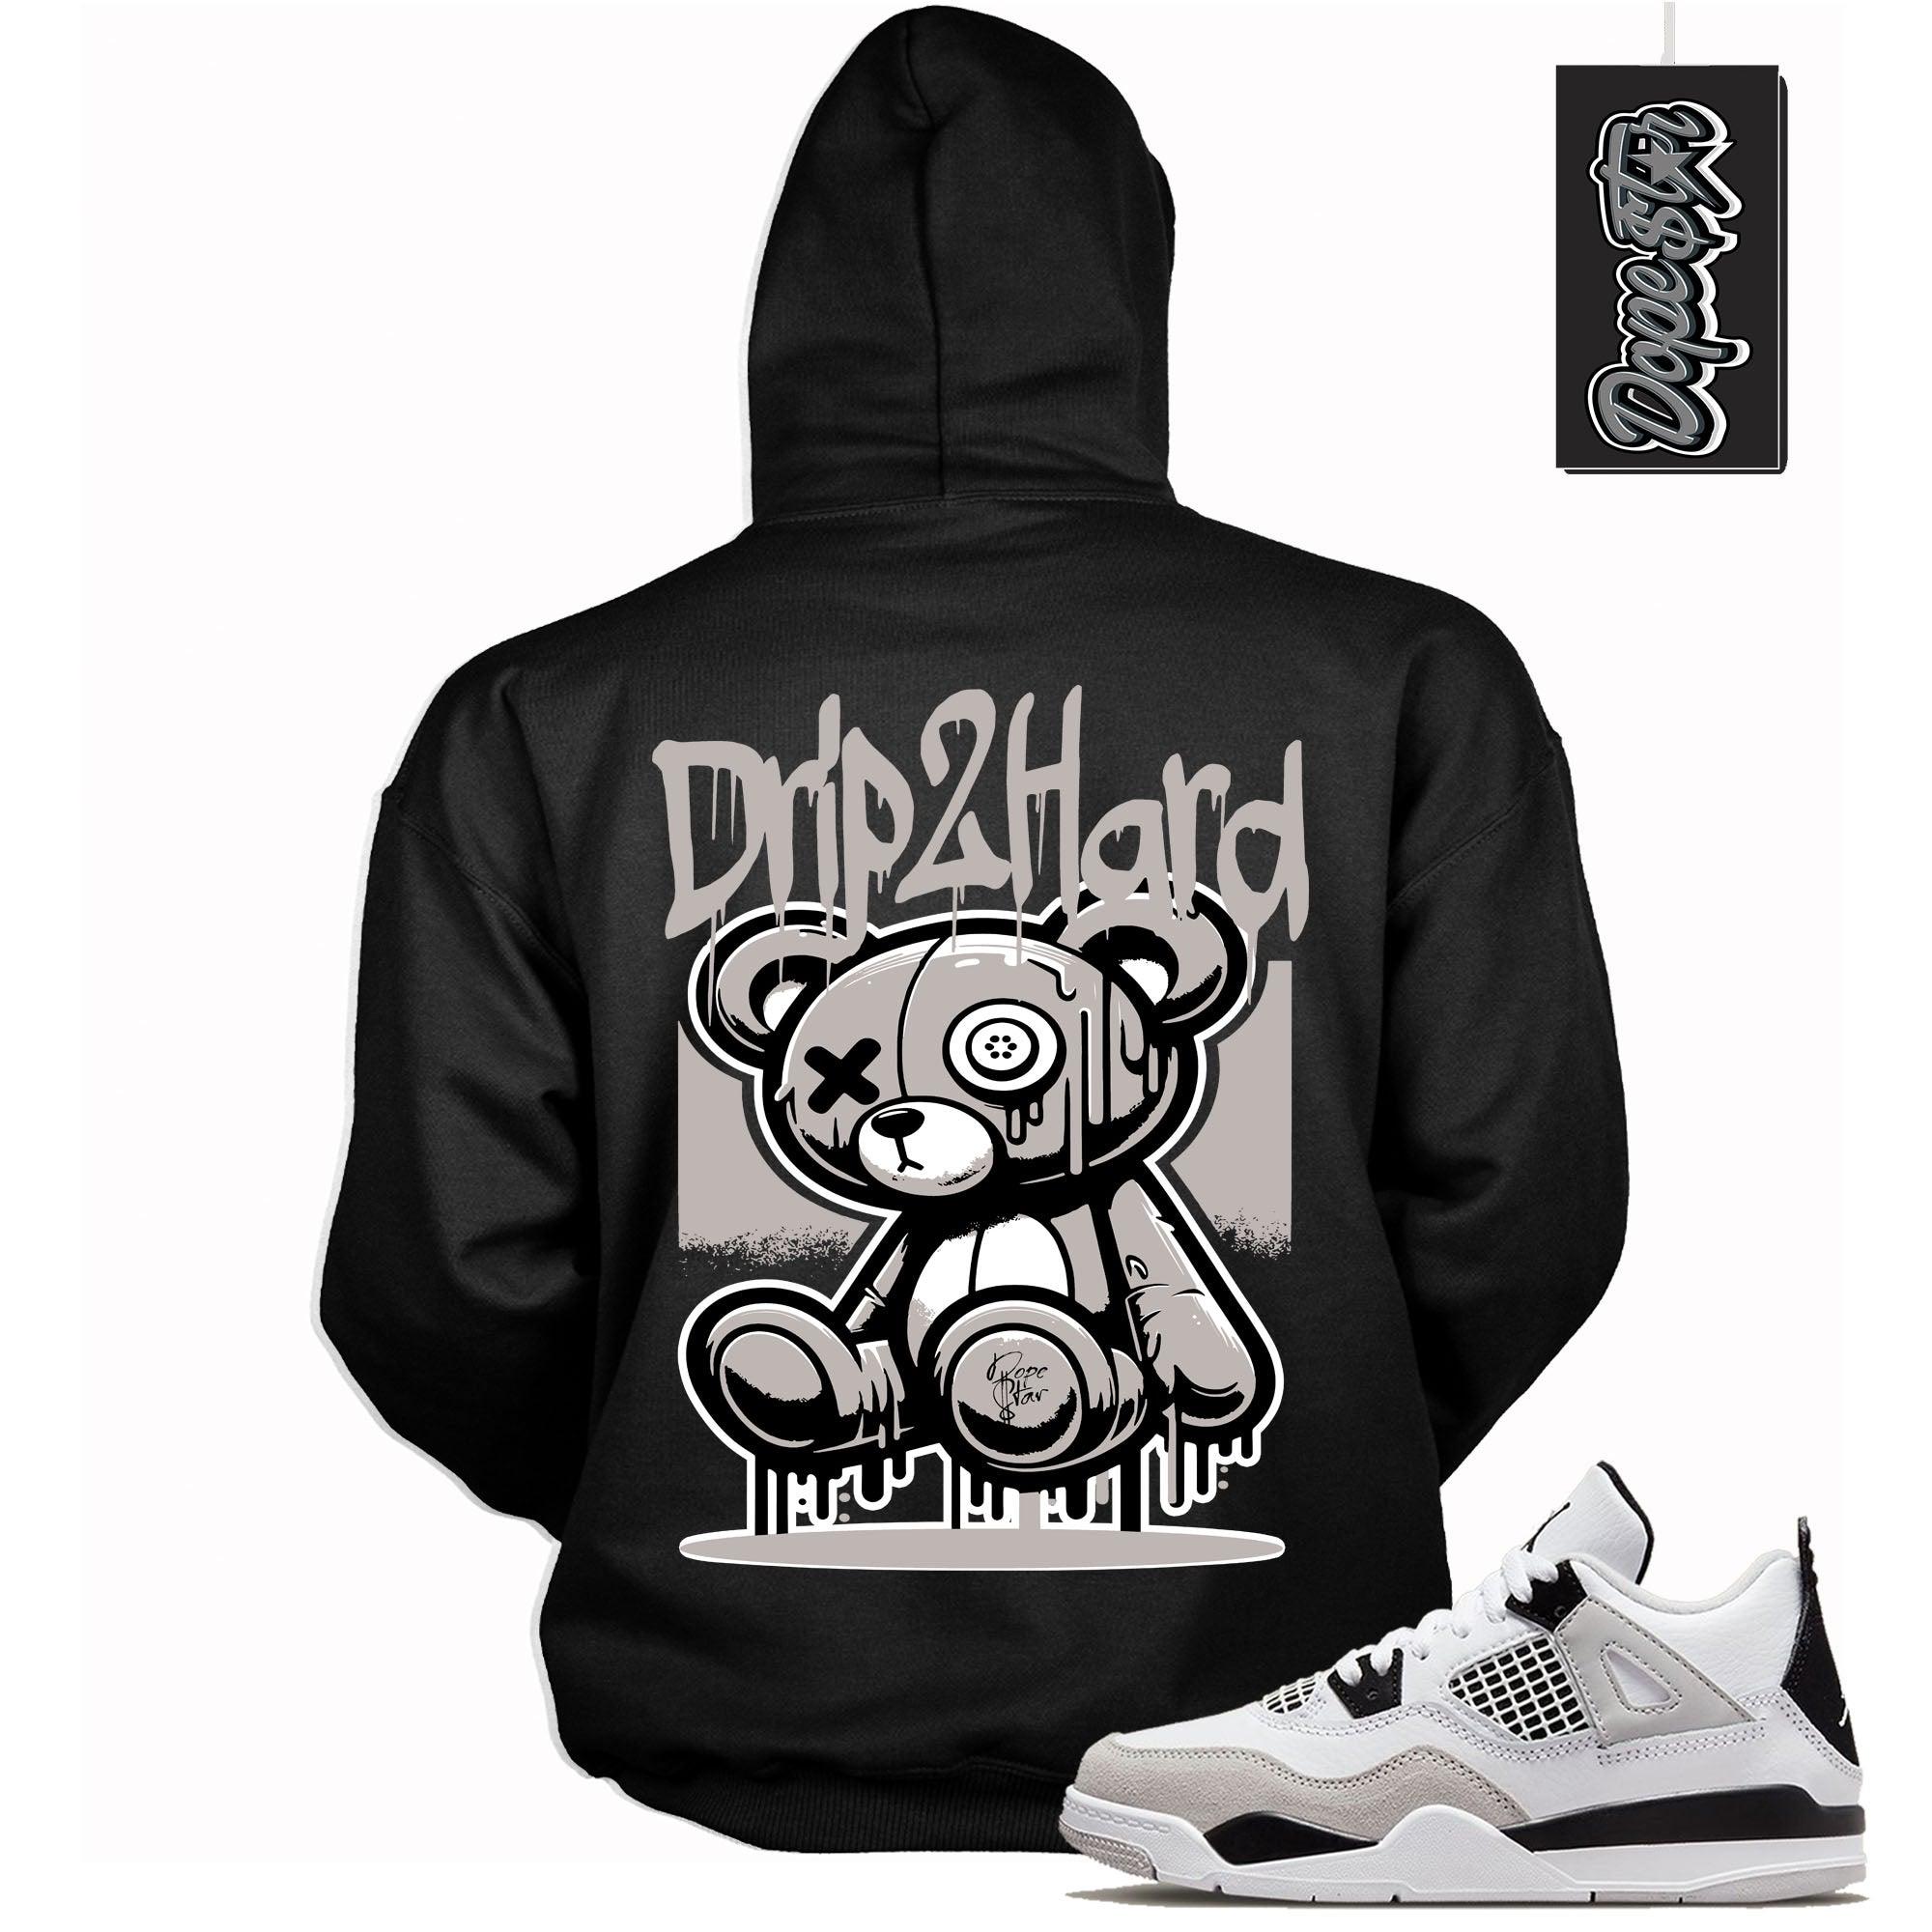 Cool Black Hoodie With Drip To Hard design That Perfectly Matches AIR JORDAN 4 RETRO MILITARY BLACK Sneakers